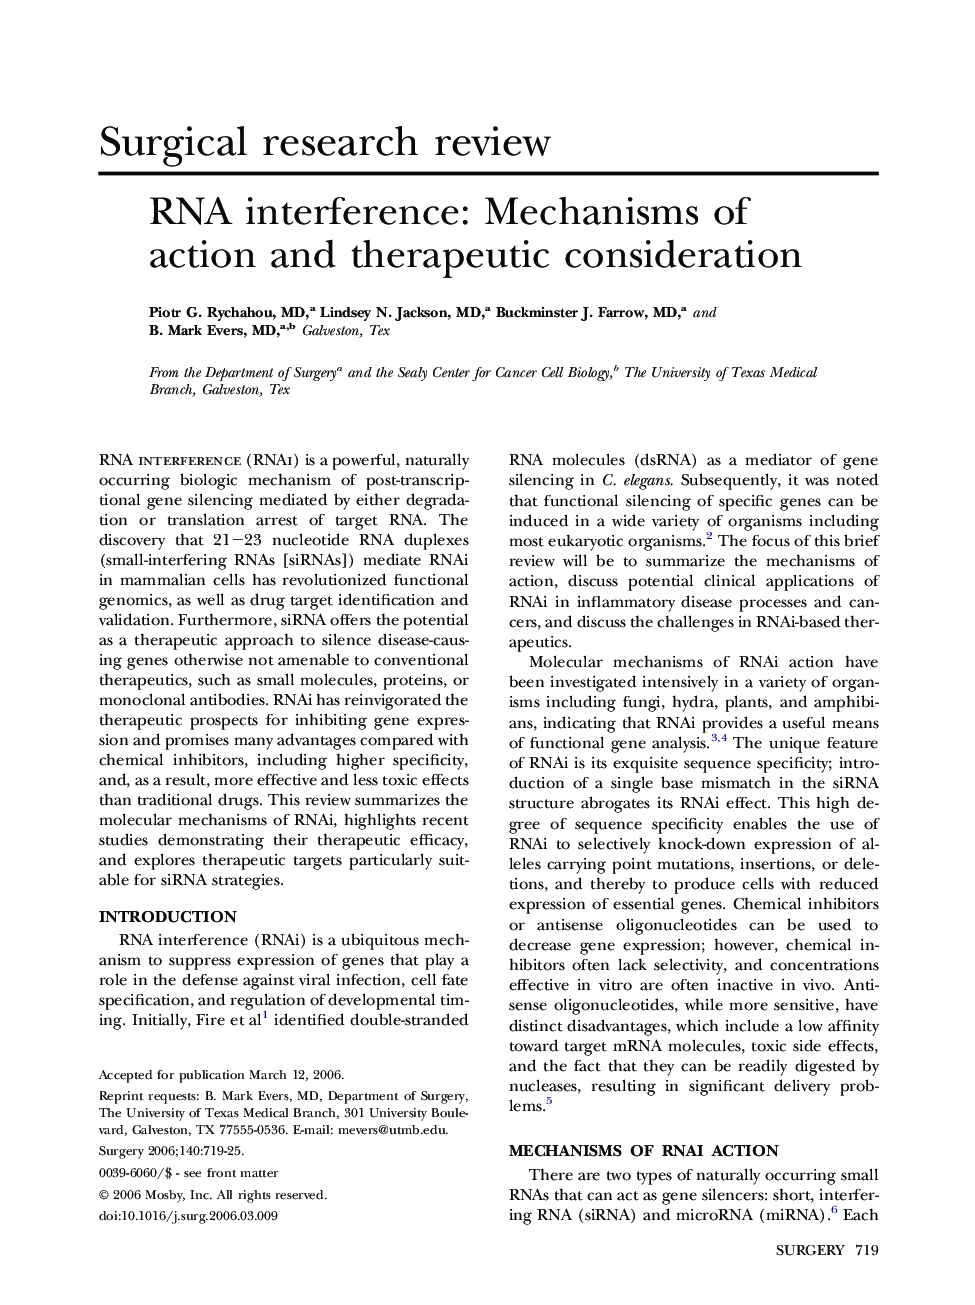 RNA interference: Mechanisms of action and therapeutic consideration